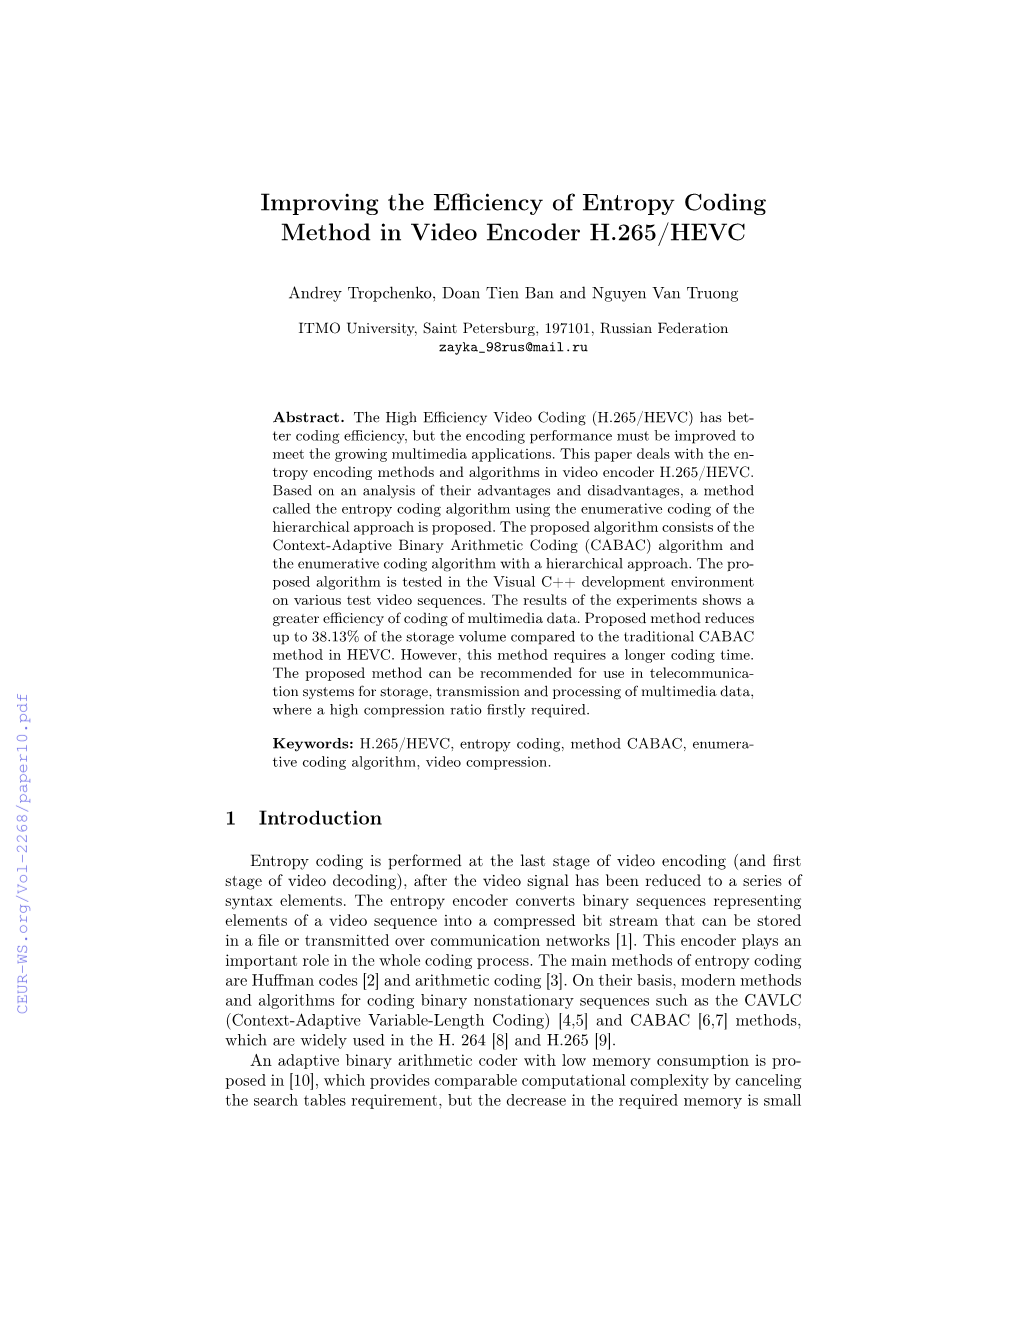 Improving the Efficiency of Entropy Coding Method in Video Encoder H